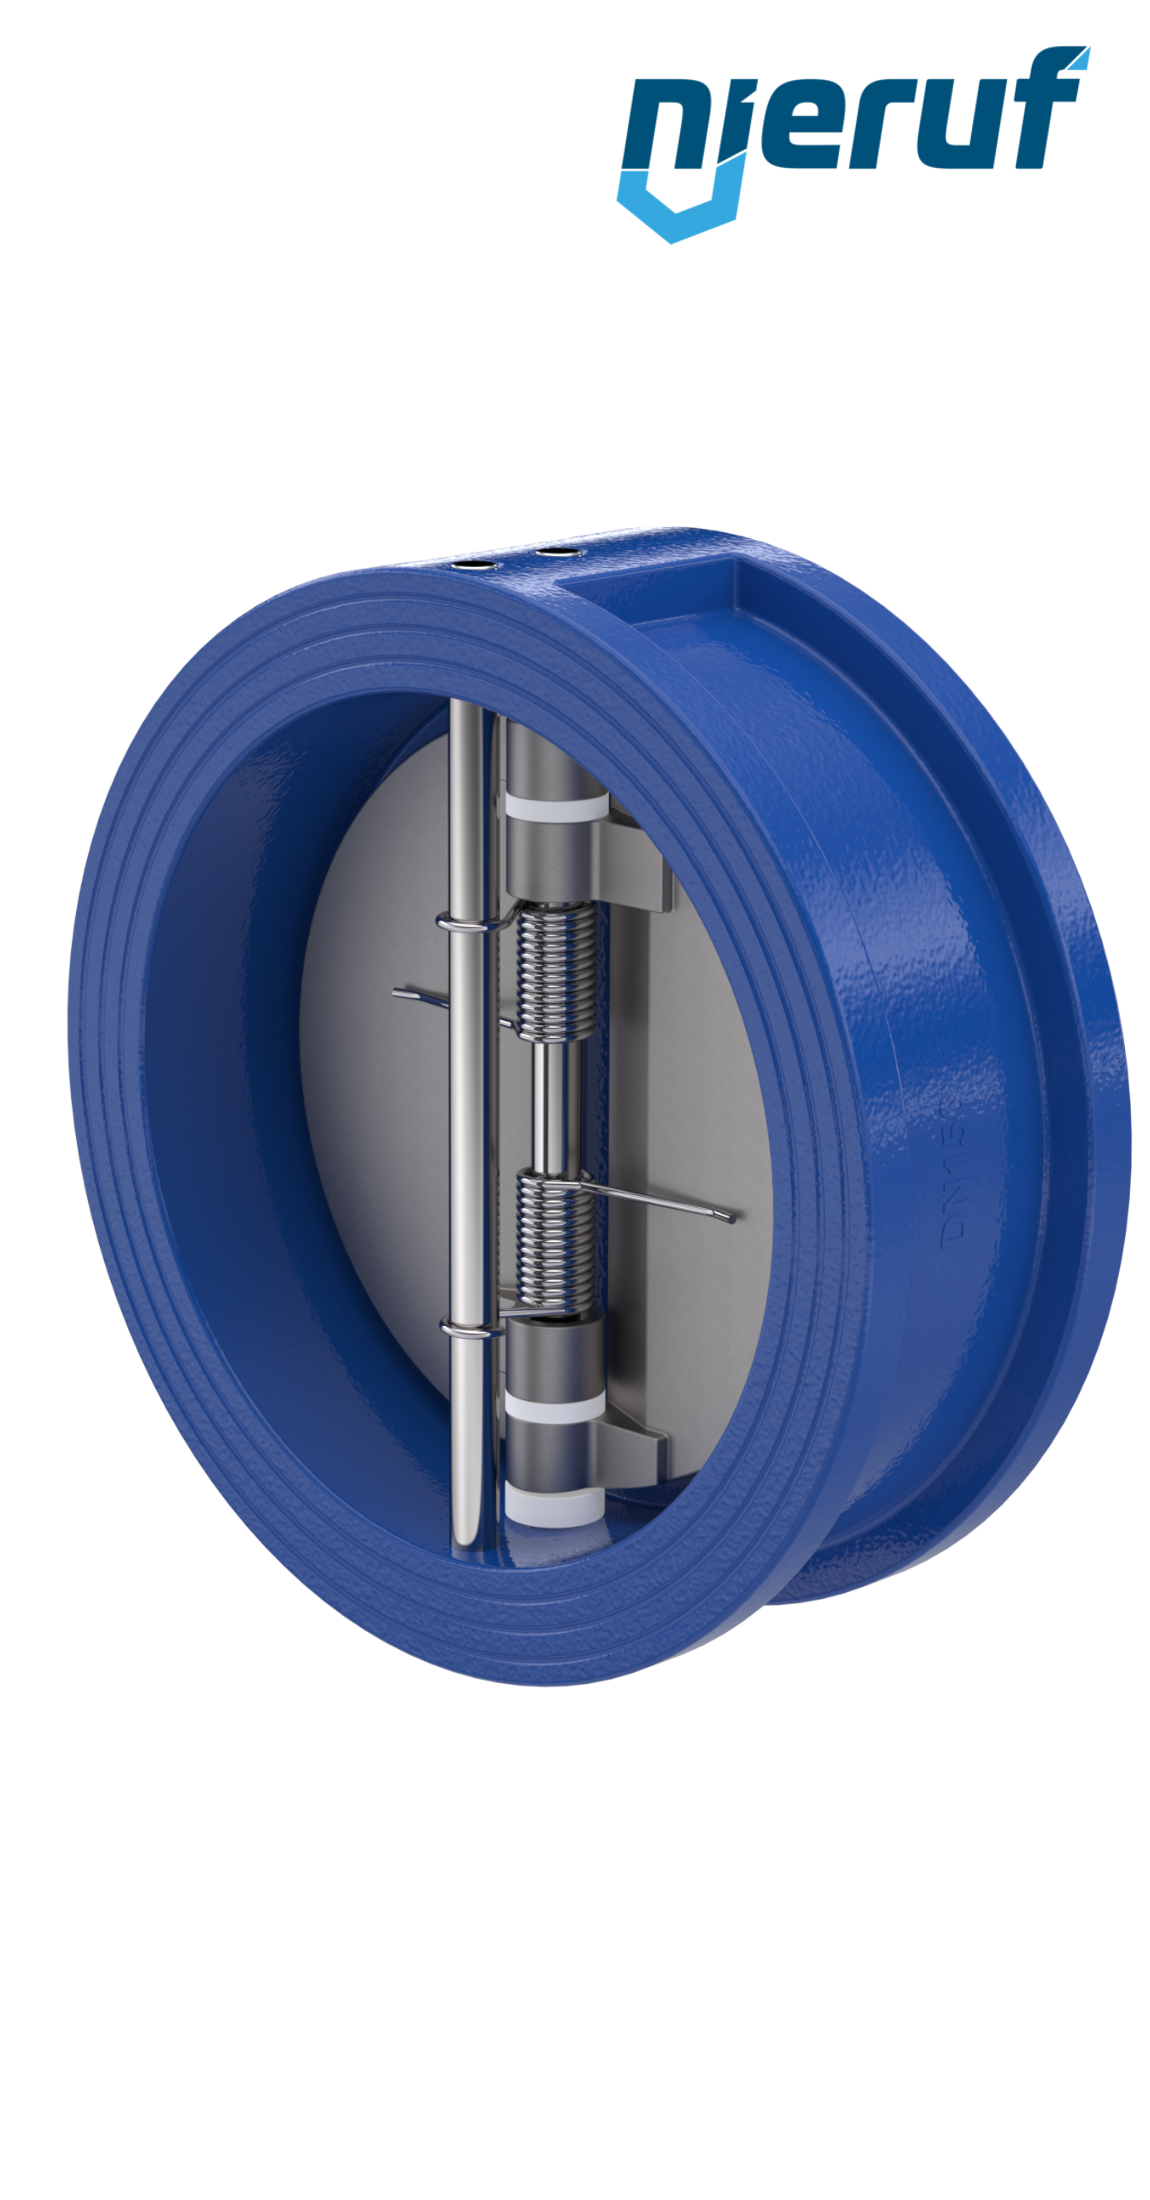 dual plate check valve DN150 DR01 GGG40 epoxyd plated blue 180µm EPDM